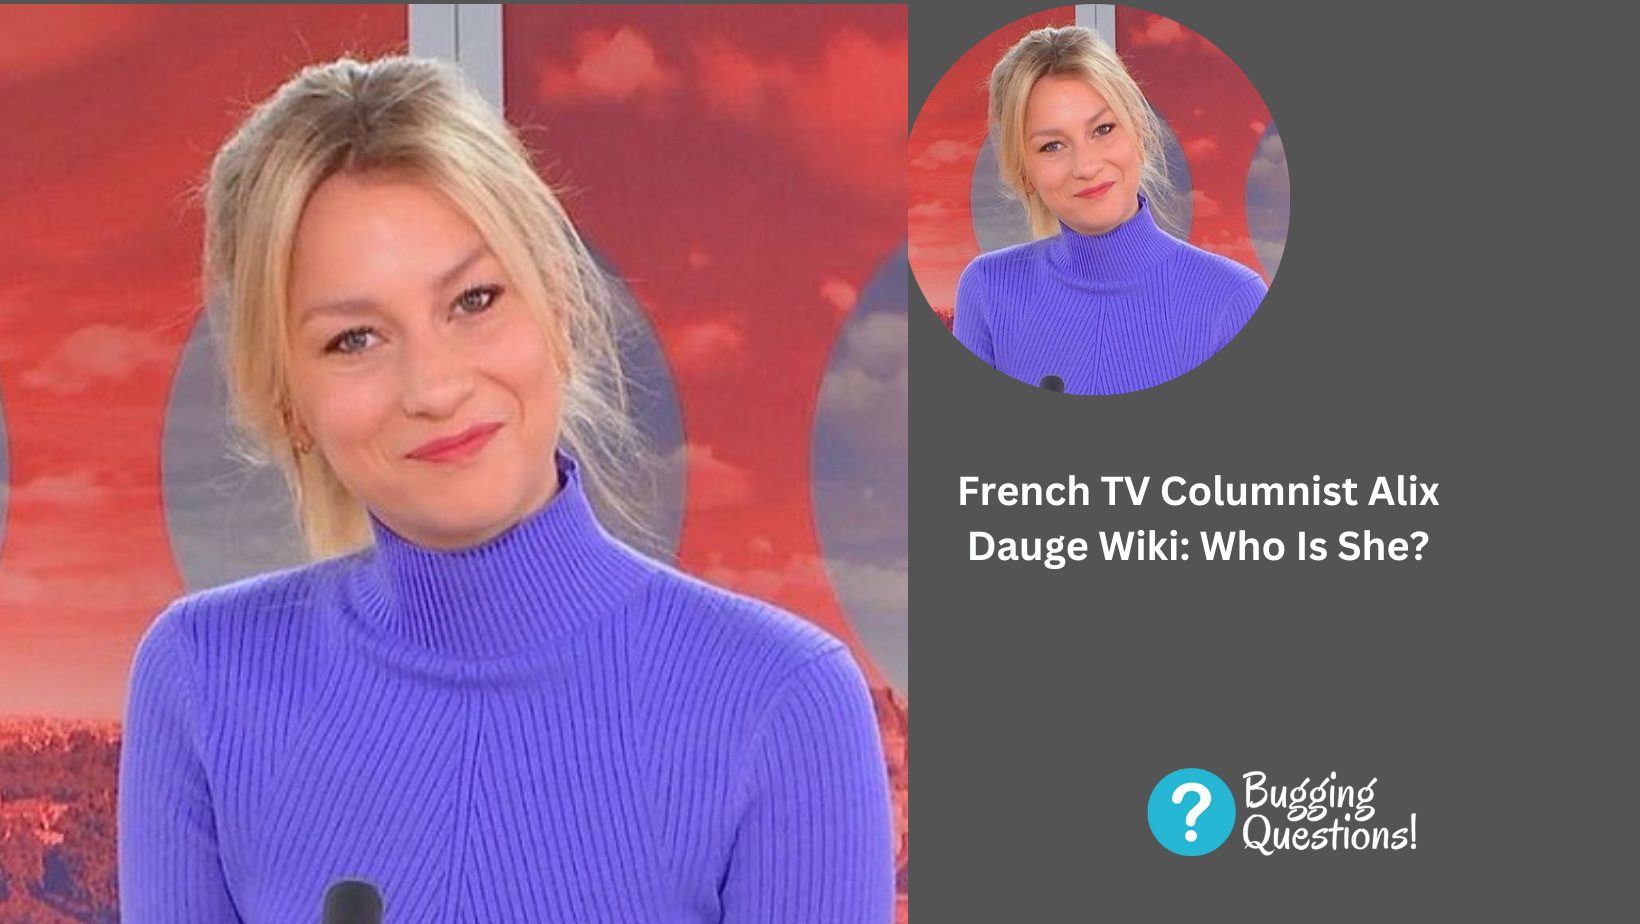 French TV Columnist Alix Dauge Wiki: Who Is She?